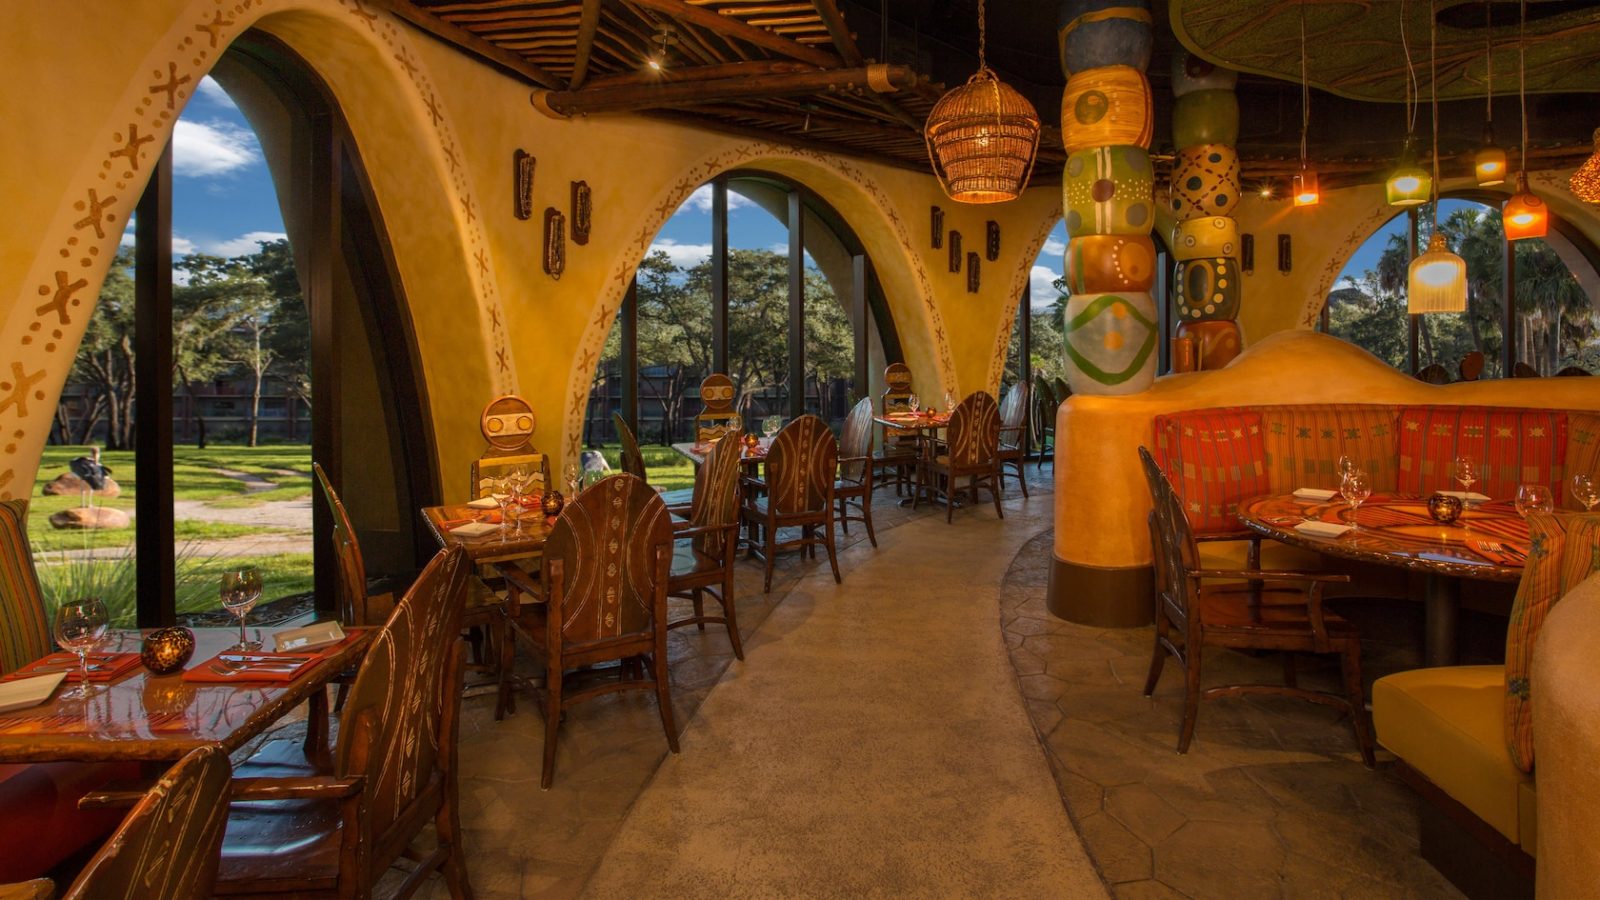 inside of Sanaa restaurant at disney with archways and furniture